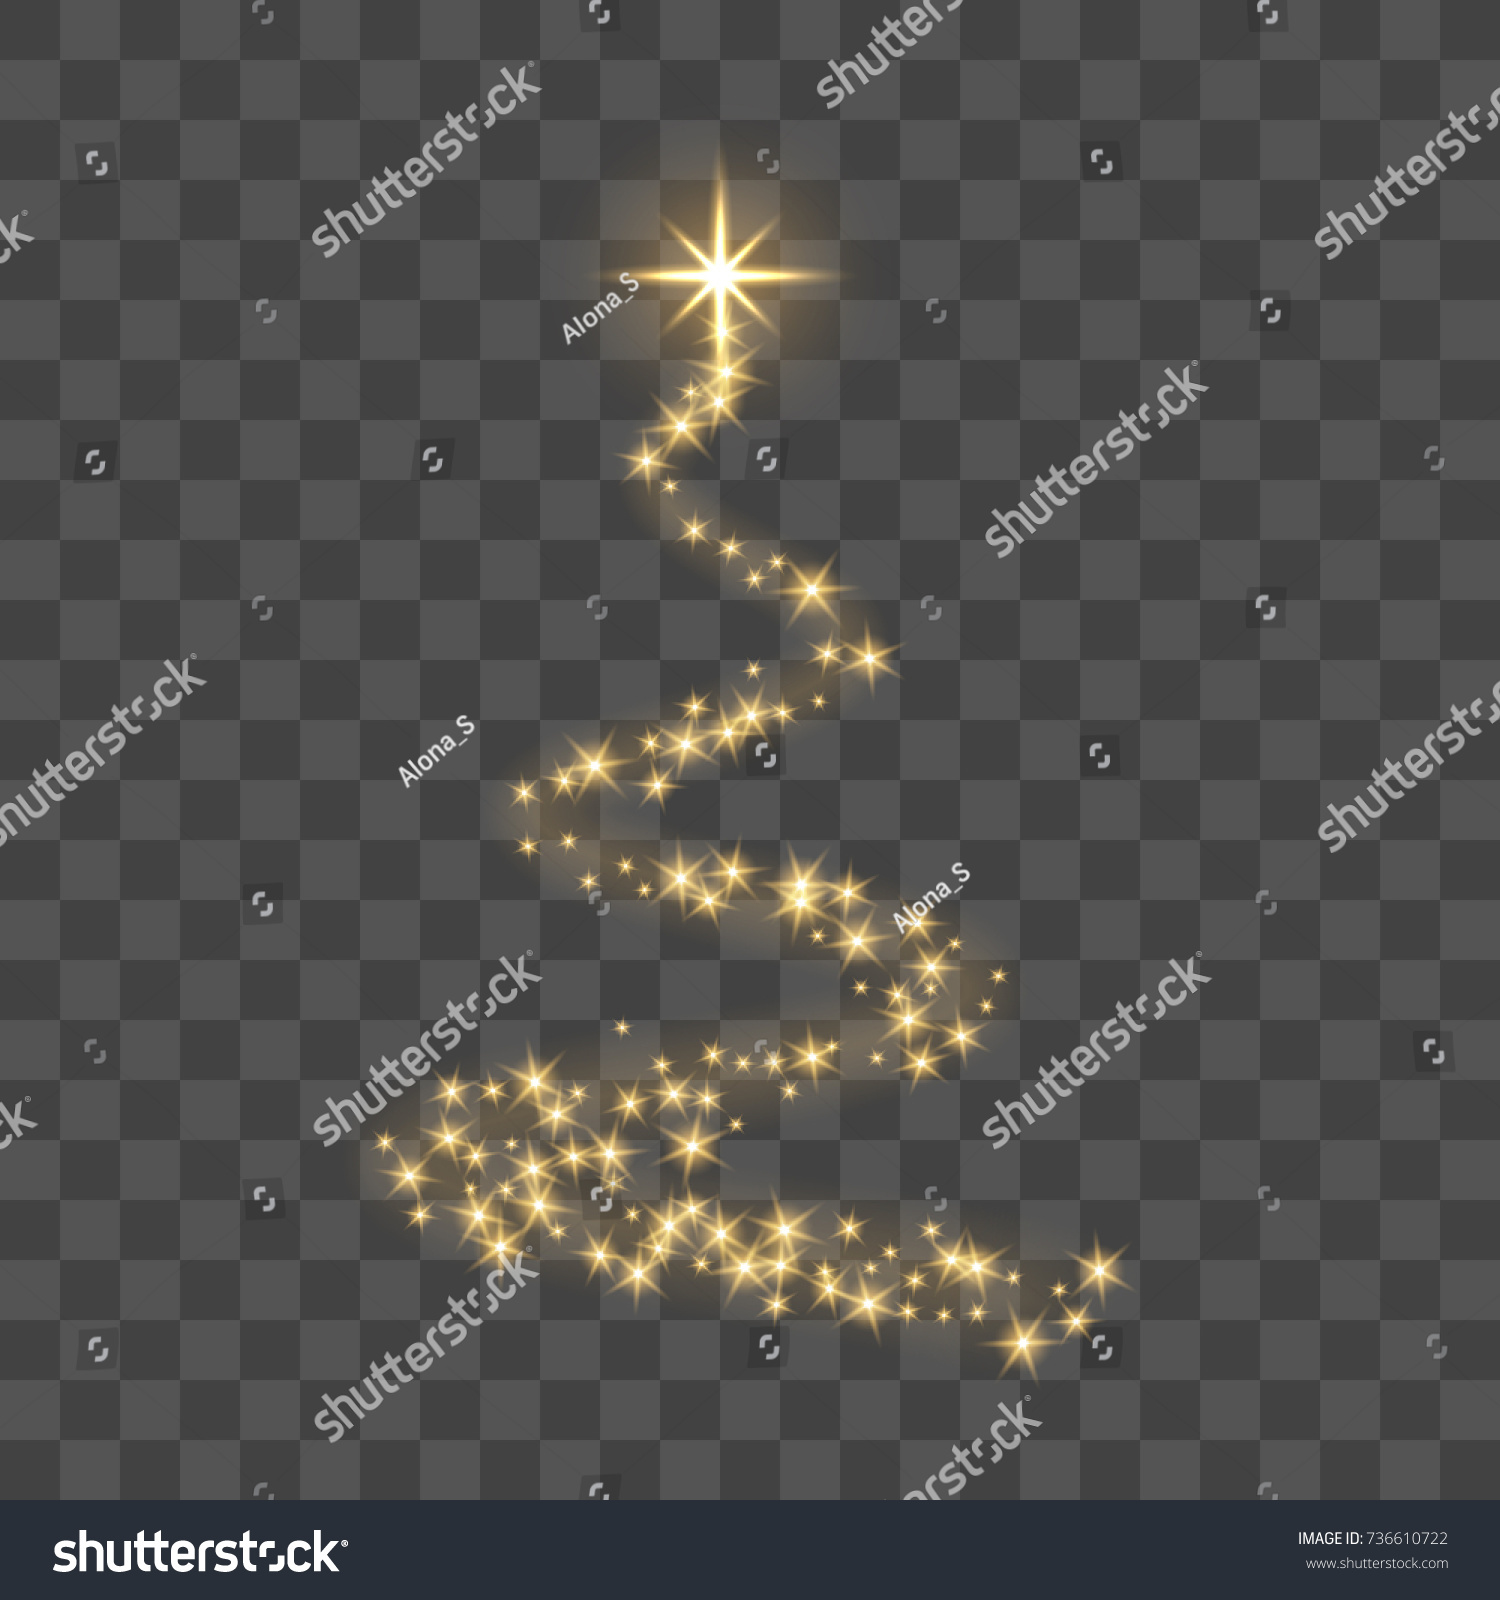 Christmas Tree Stylized On Transparent Background Stock Vector (Royalty ...